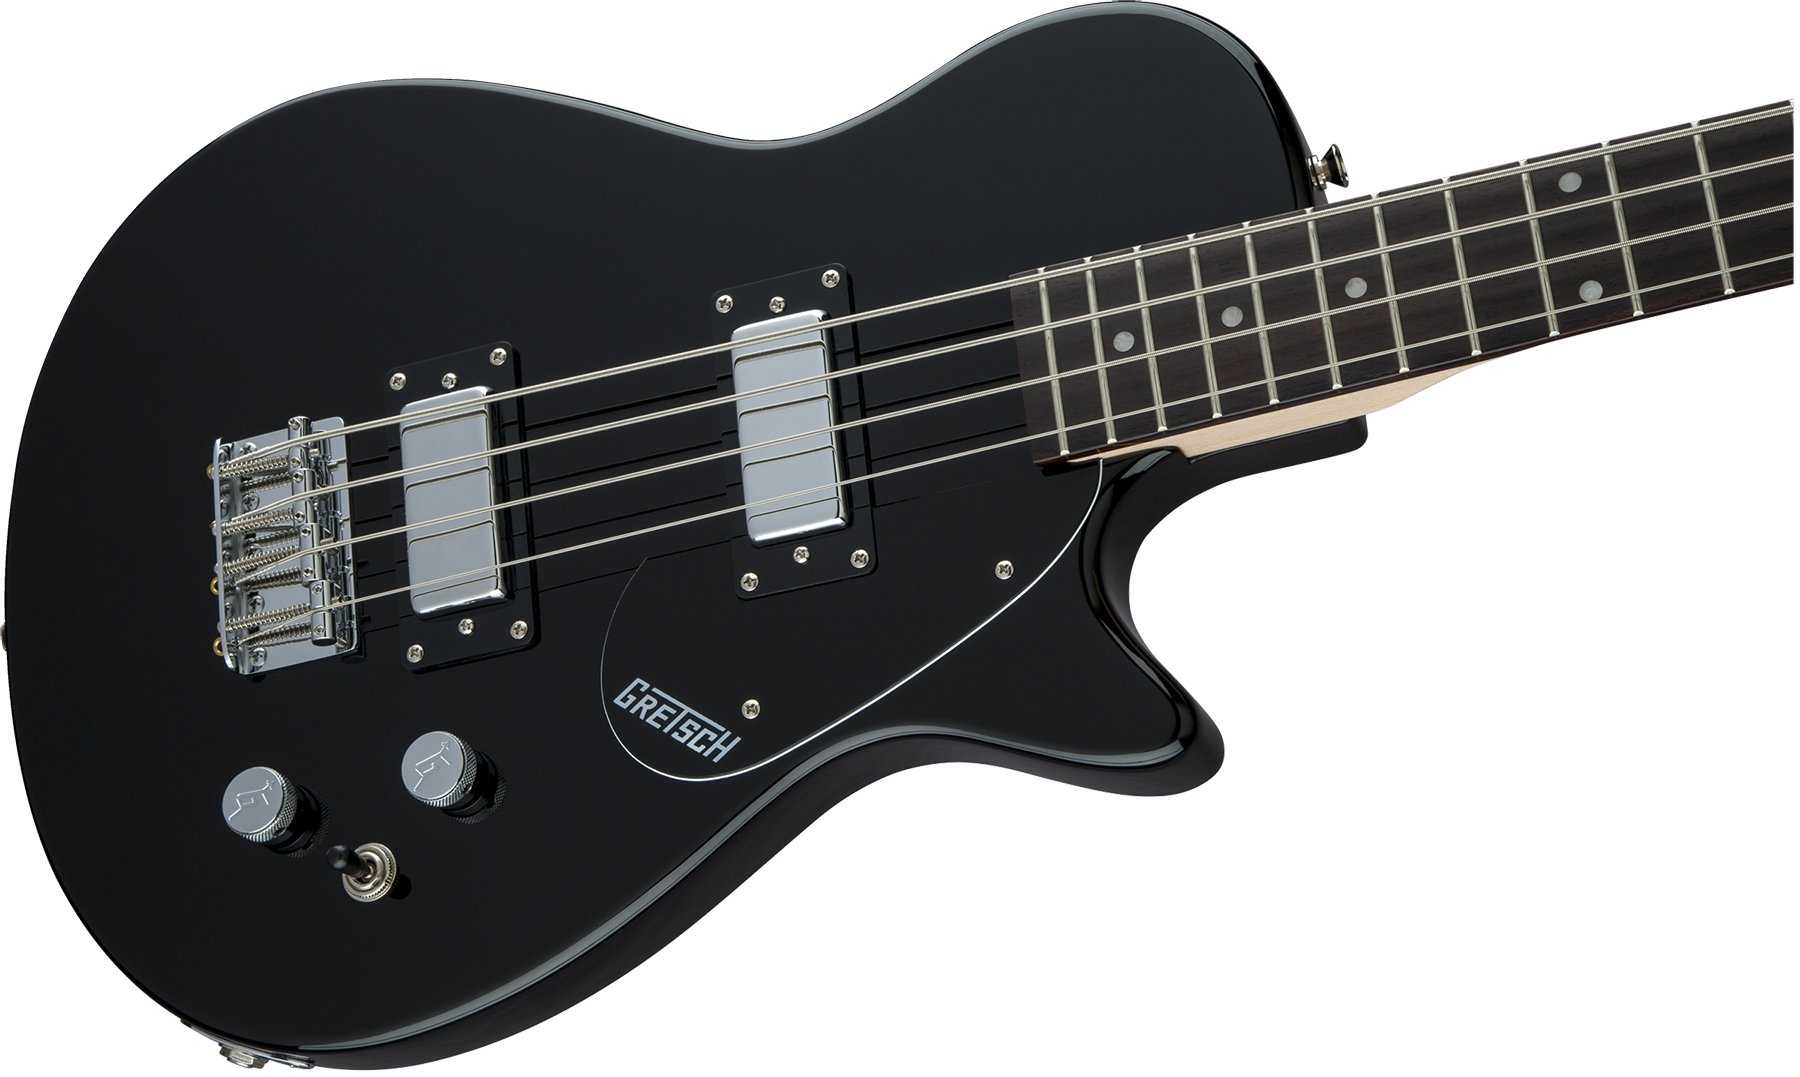 Gretsch G2220 Electromatic Junior Jet Bass Ii Short-scale 2019 Hh Wal - Black - Solid body electric bass - Variation 2